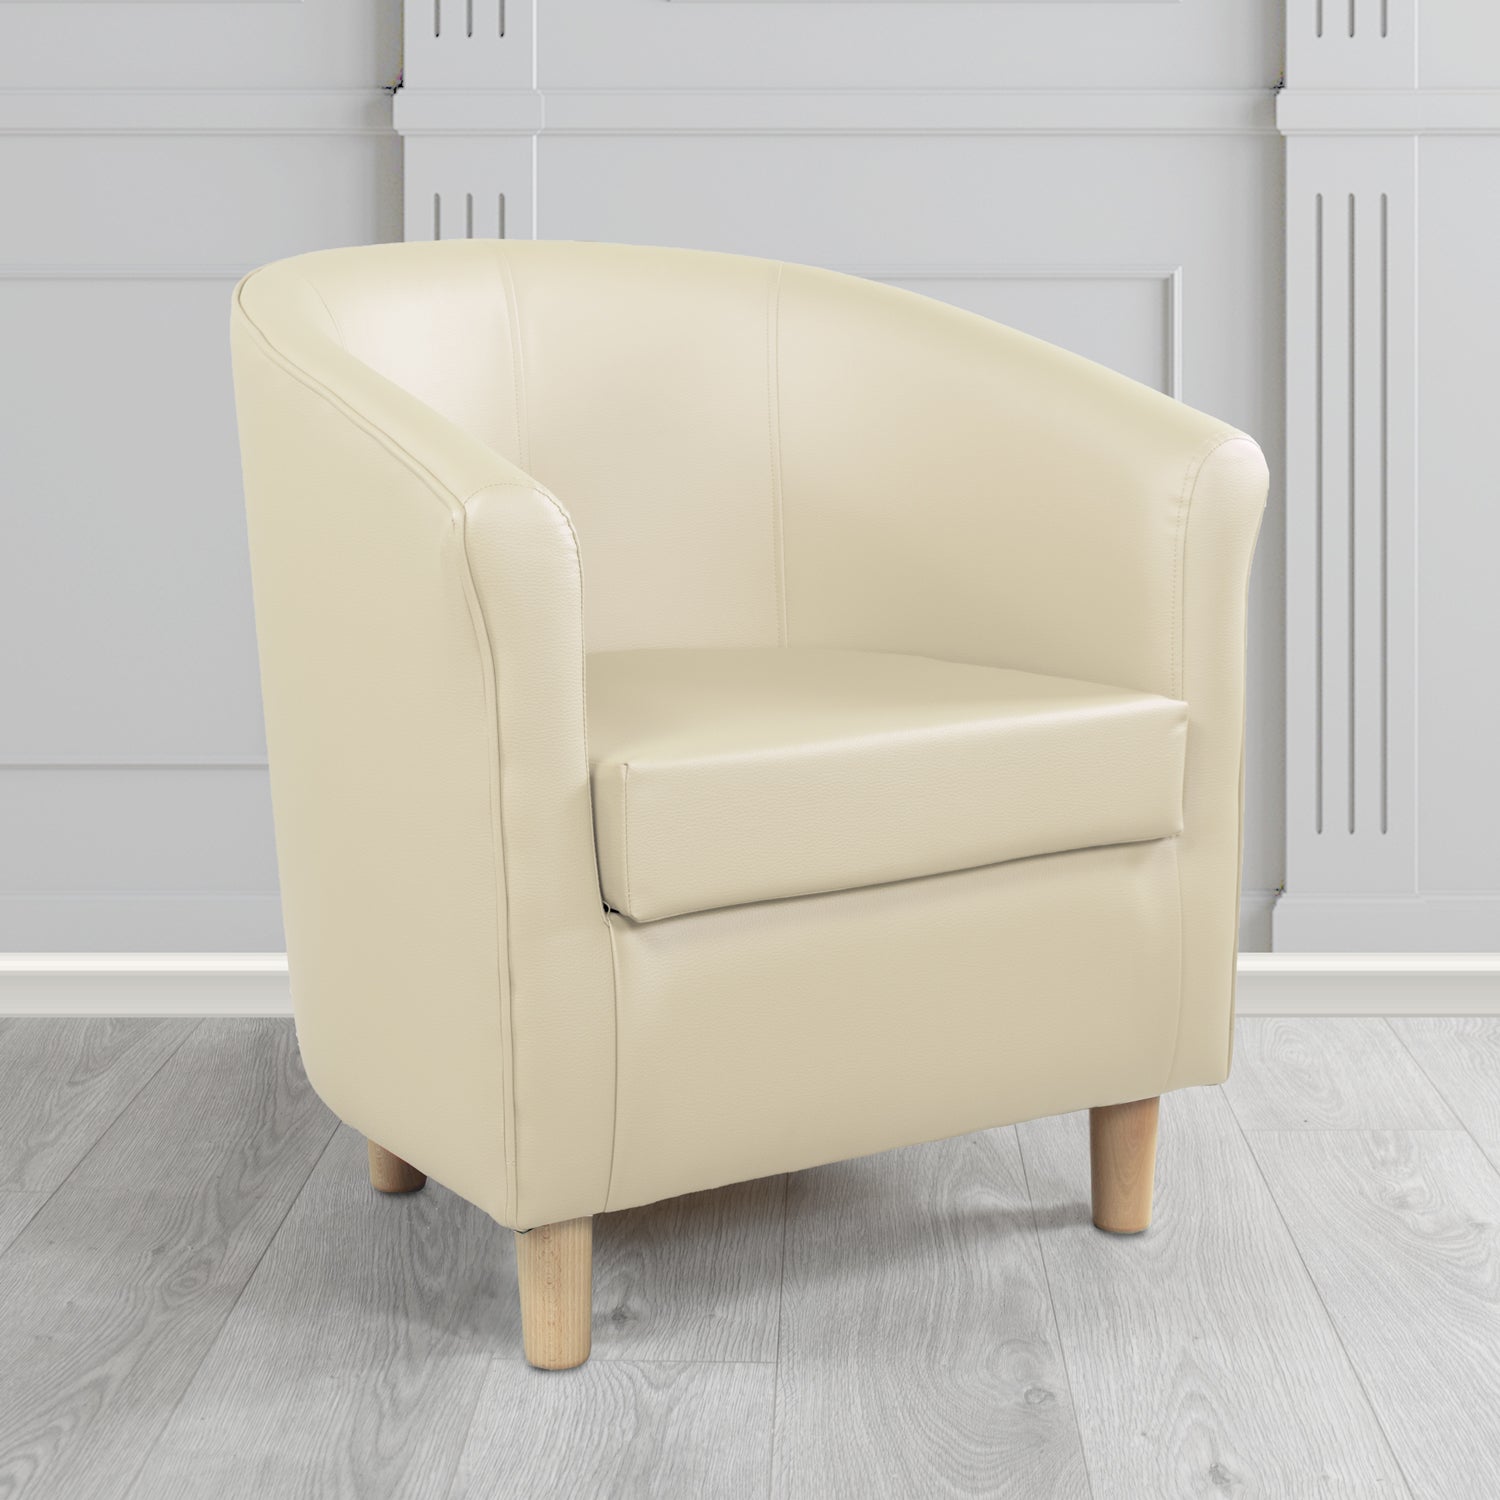 Tuscany Tub Chair in Madrid Cream Faux Leather - The Tub Chair Shop